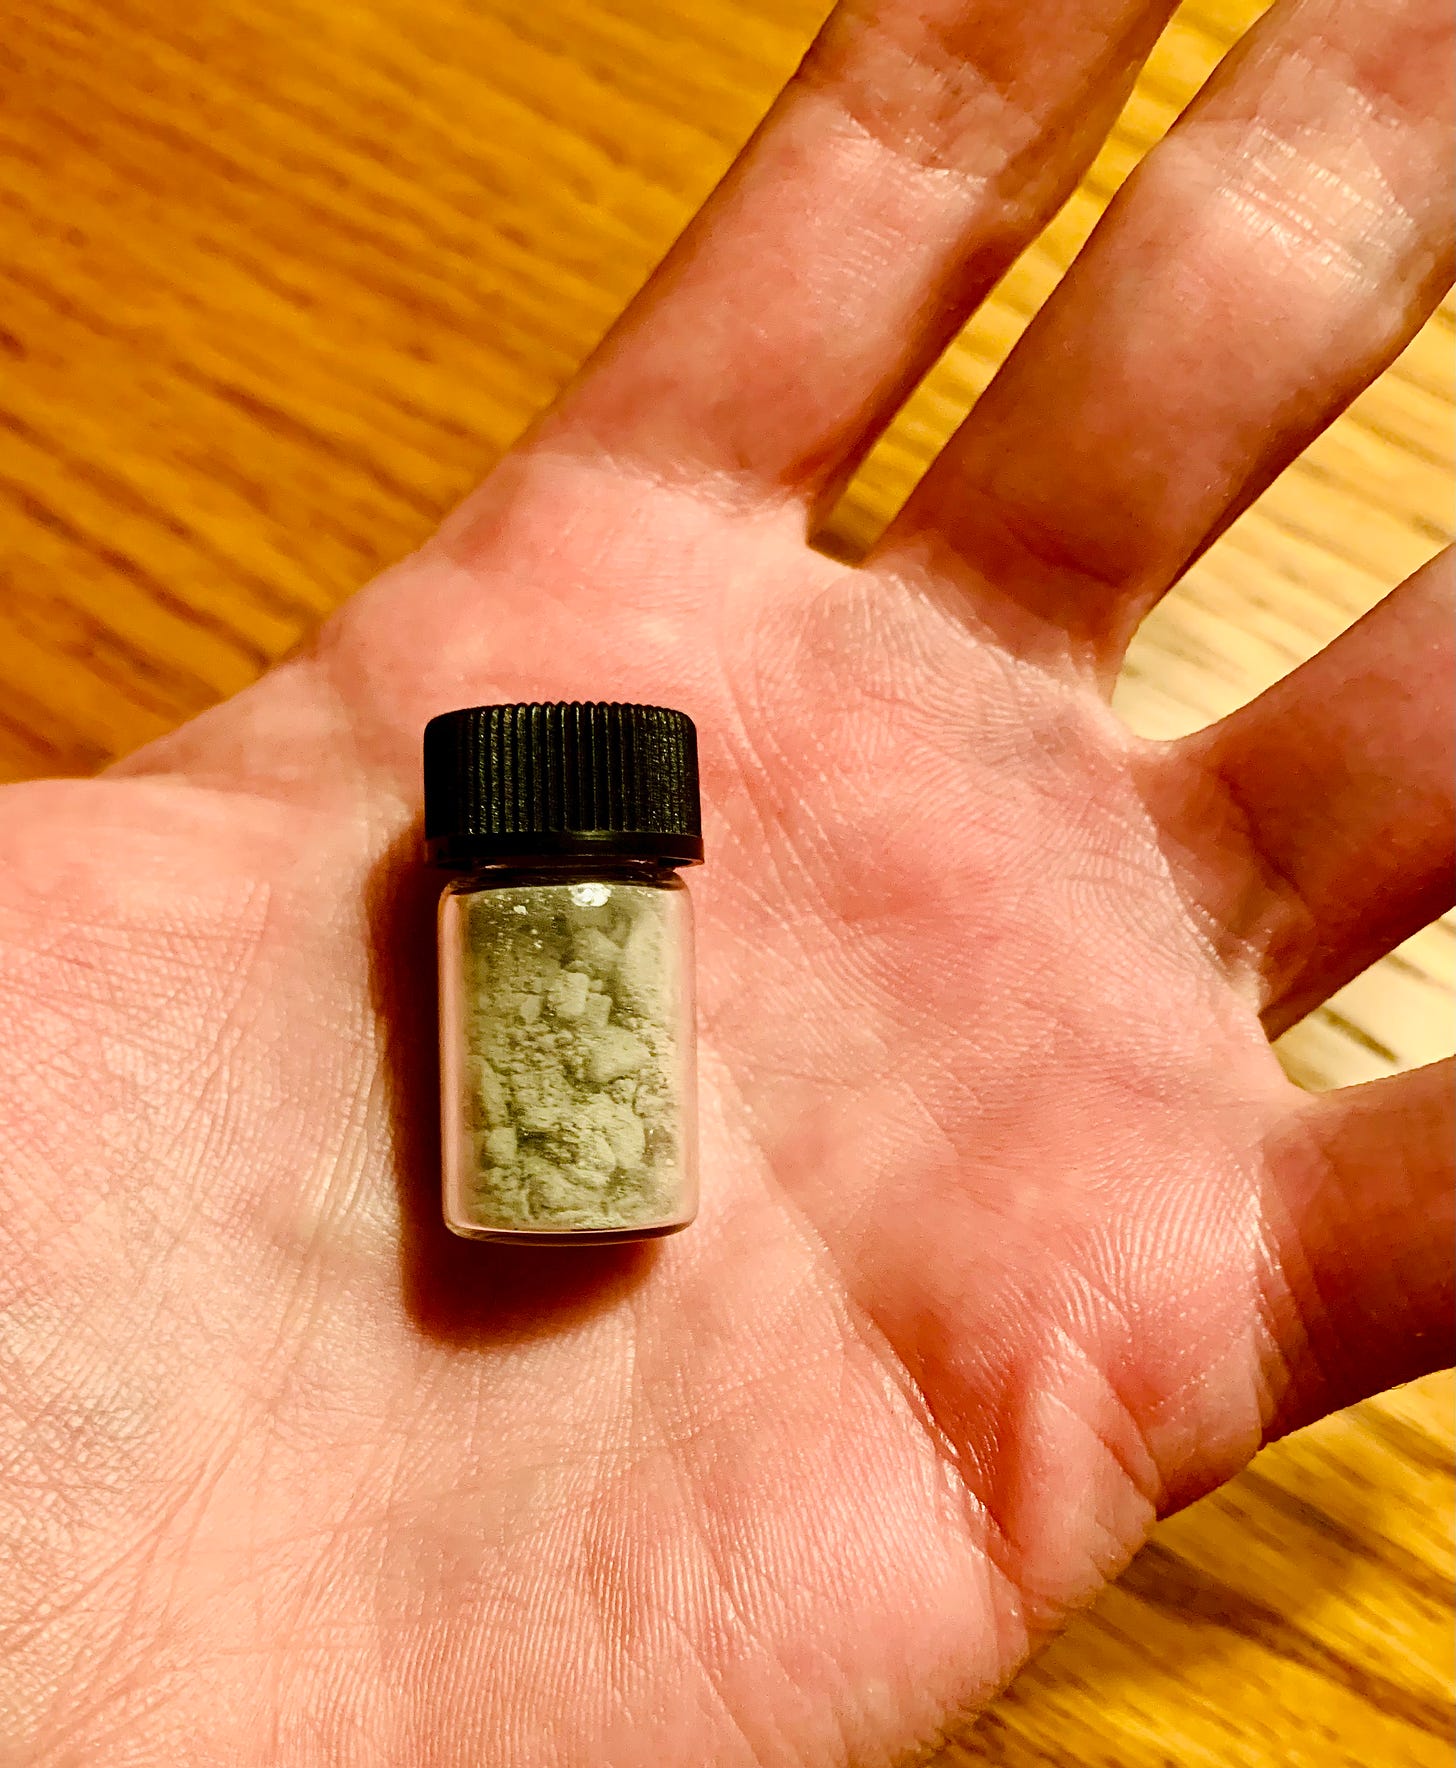 A small jar of grey dust in an open palm..